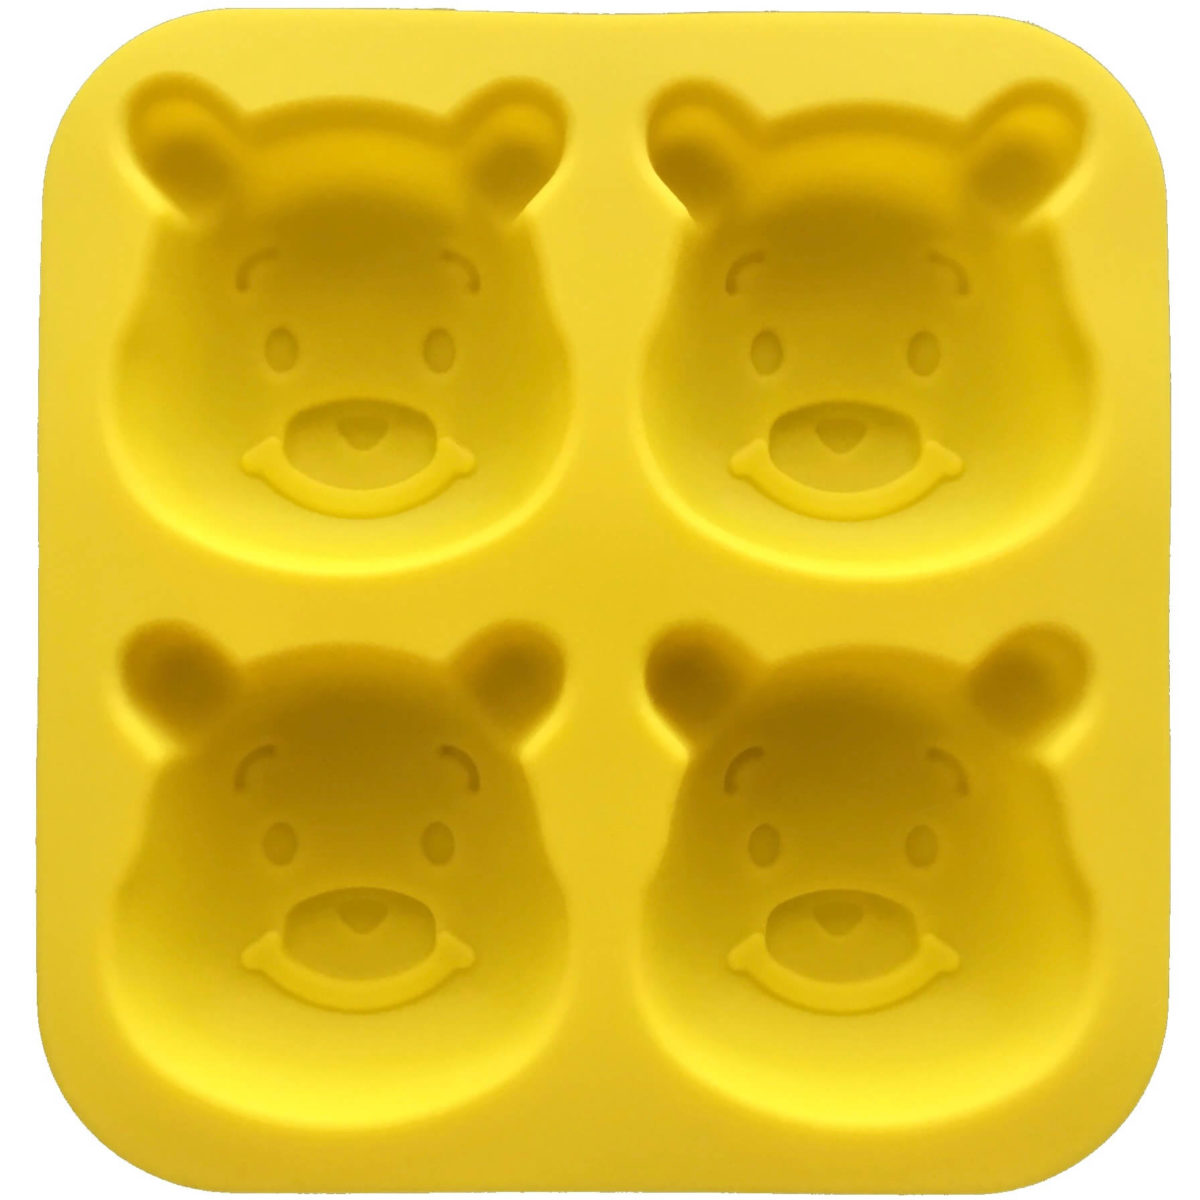 back of yellow four cavity silicone mould with identical pooh bear-shaped cavites showing mould cavity details